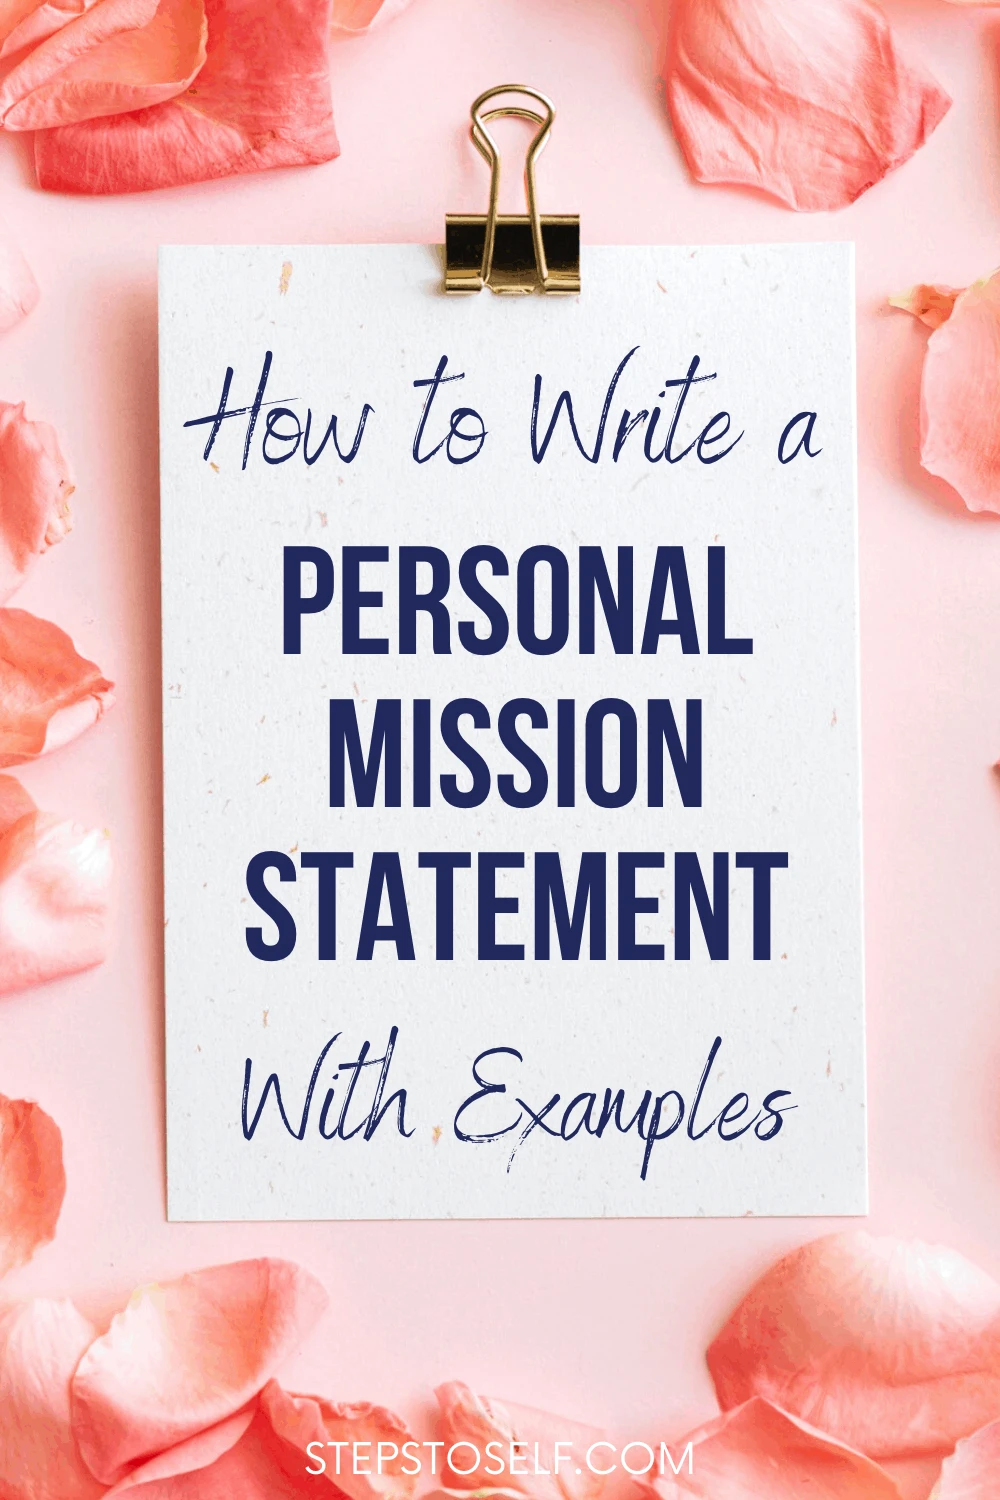 How to Write a Personal Mission Statement